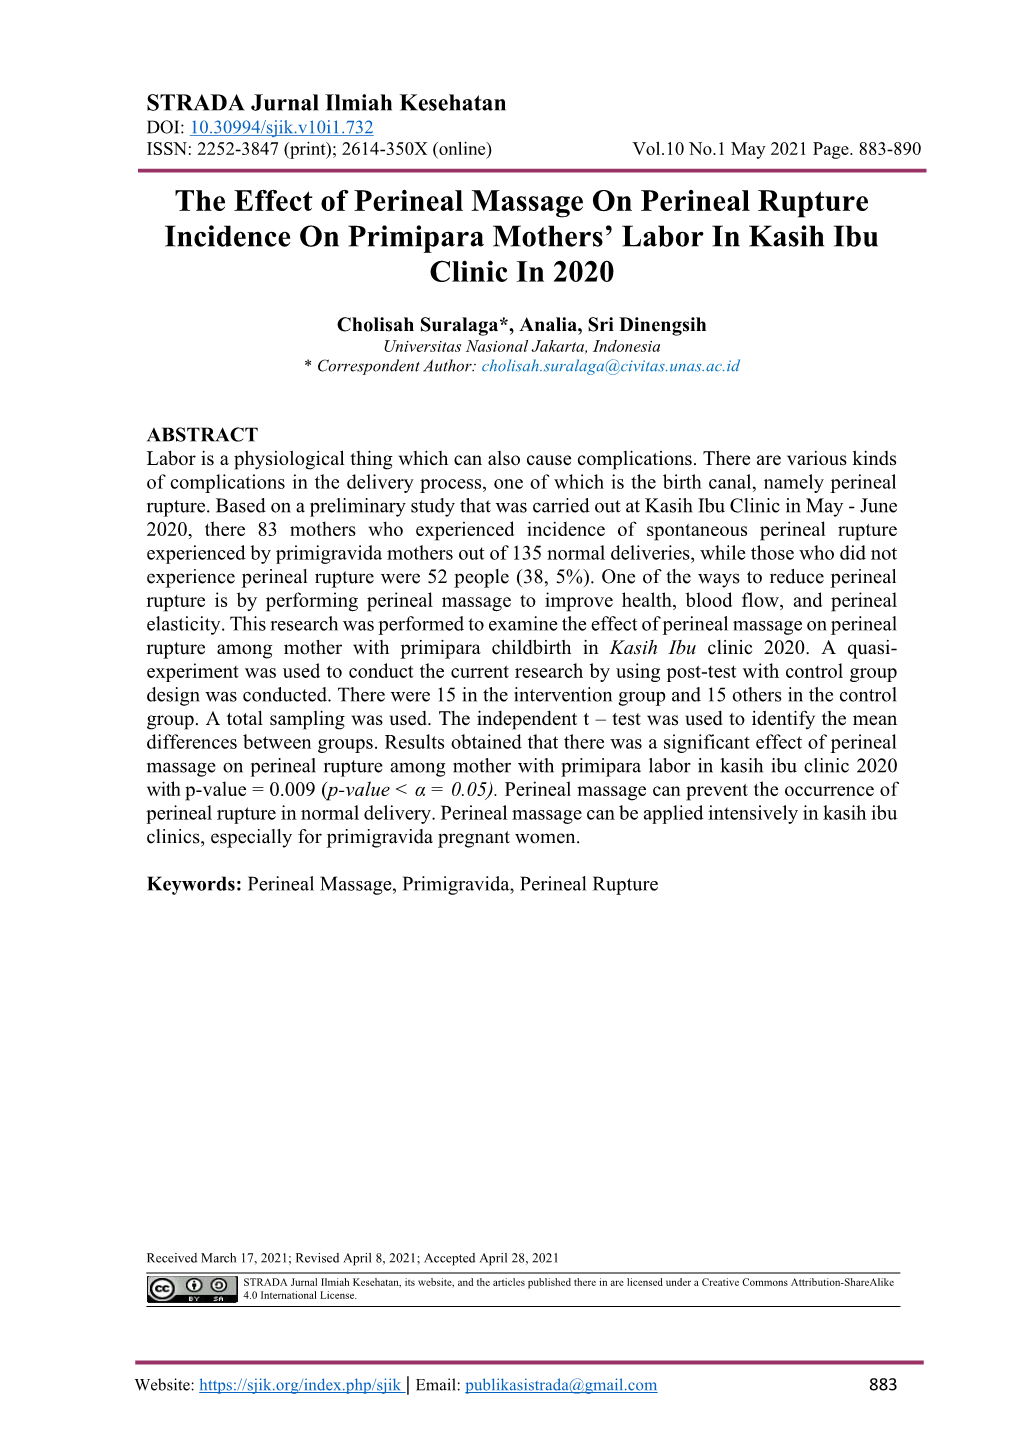 The Effect of Perineal Massage on Perineal Rupture Incidence on Primipara Mothers’ Labor in Kasih Ibu Clinic in 2020